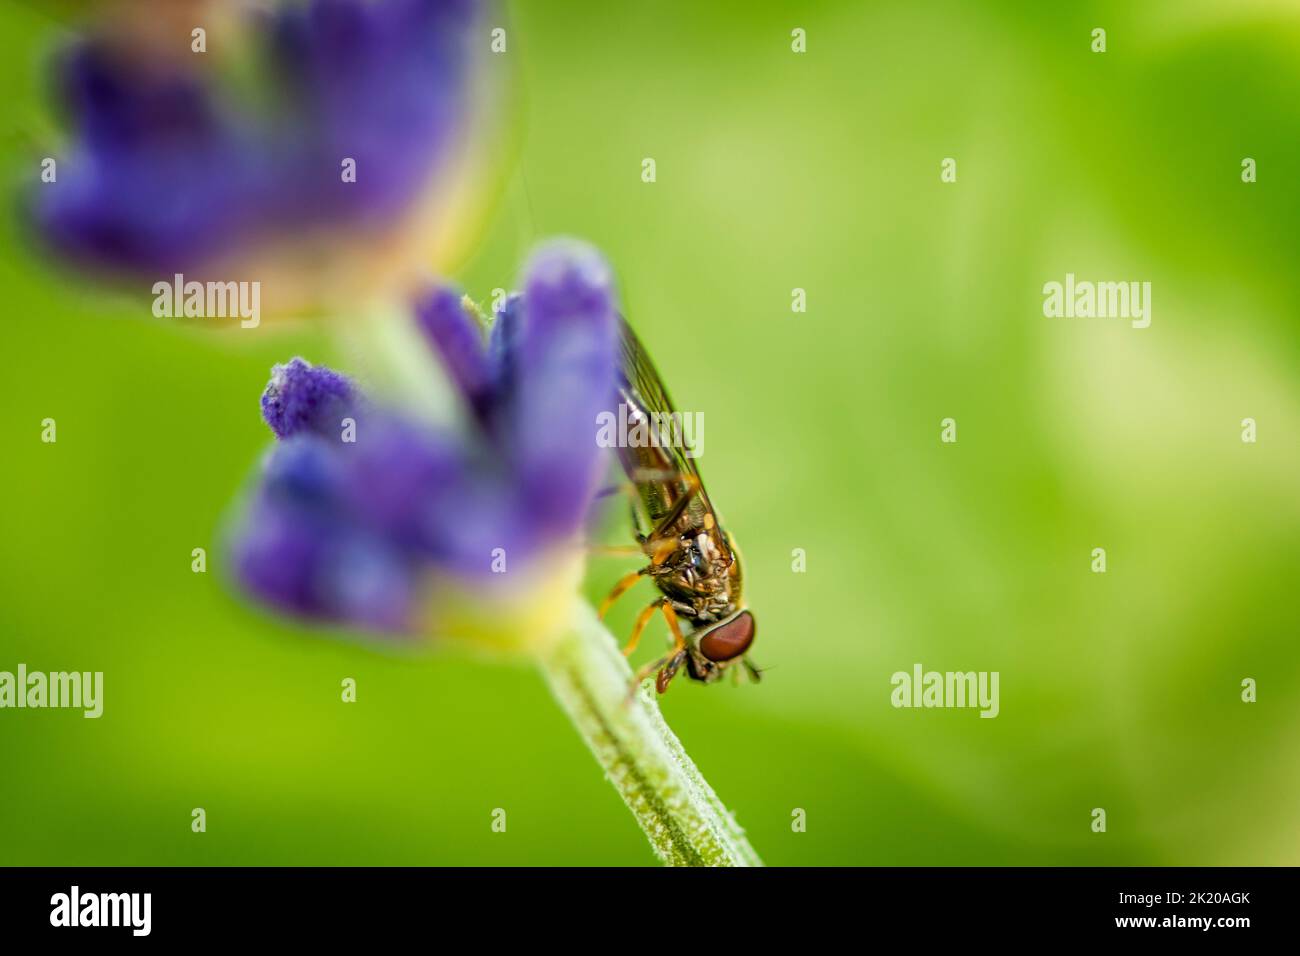 Macro view of a fly on the stem of a lavender flower, against a blurred natural green background. Stock Photo